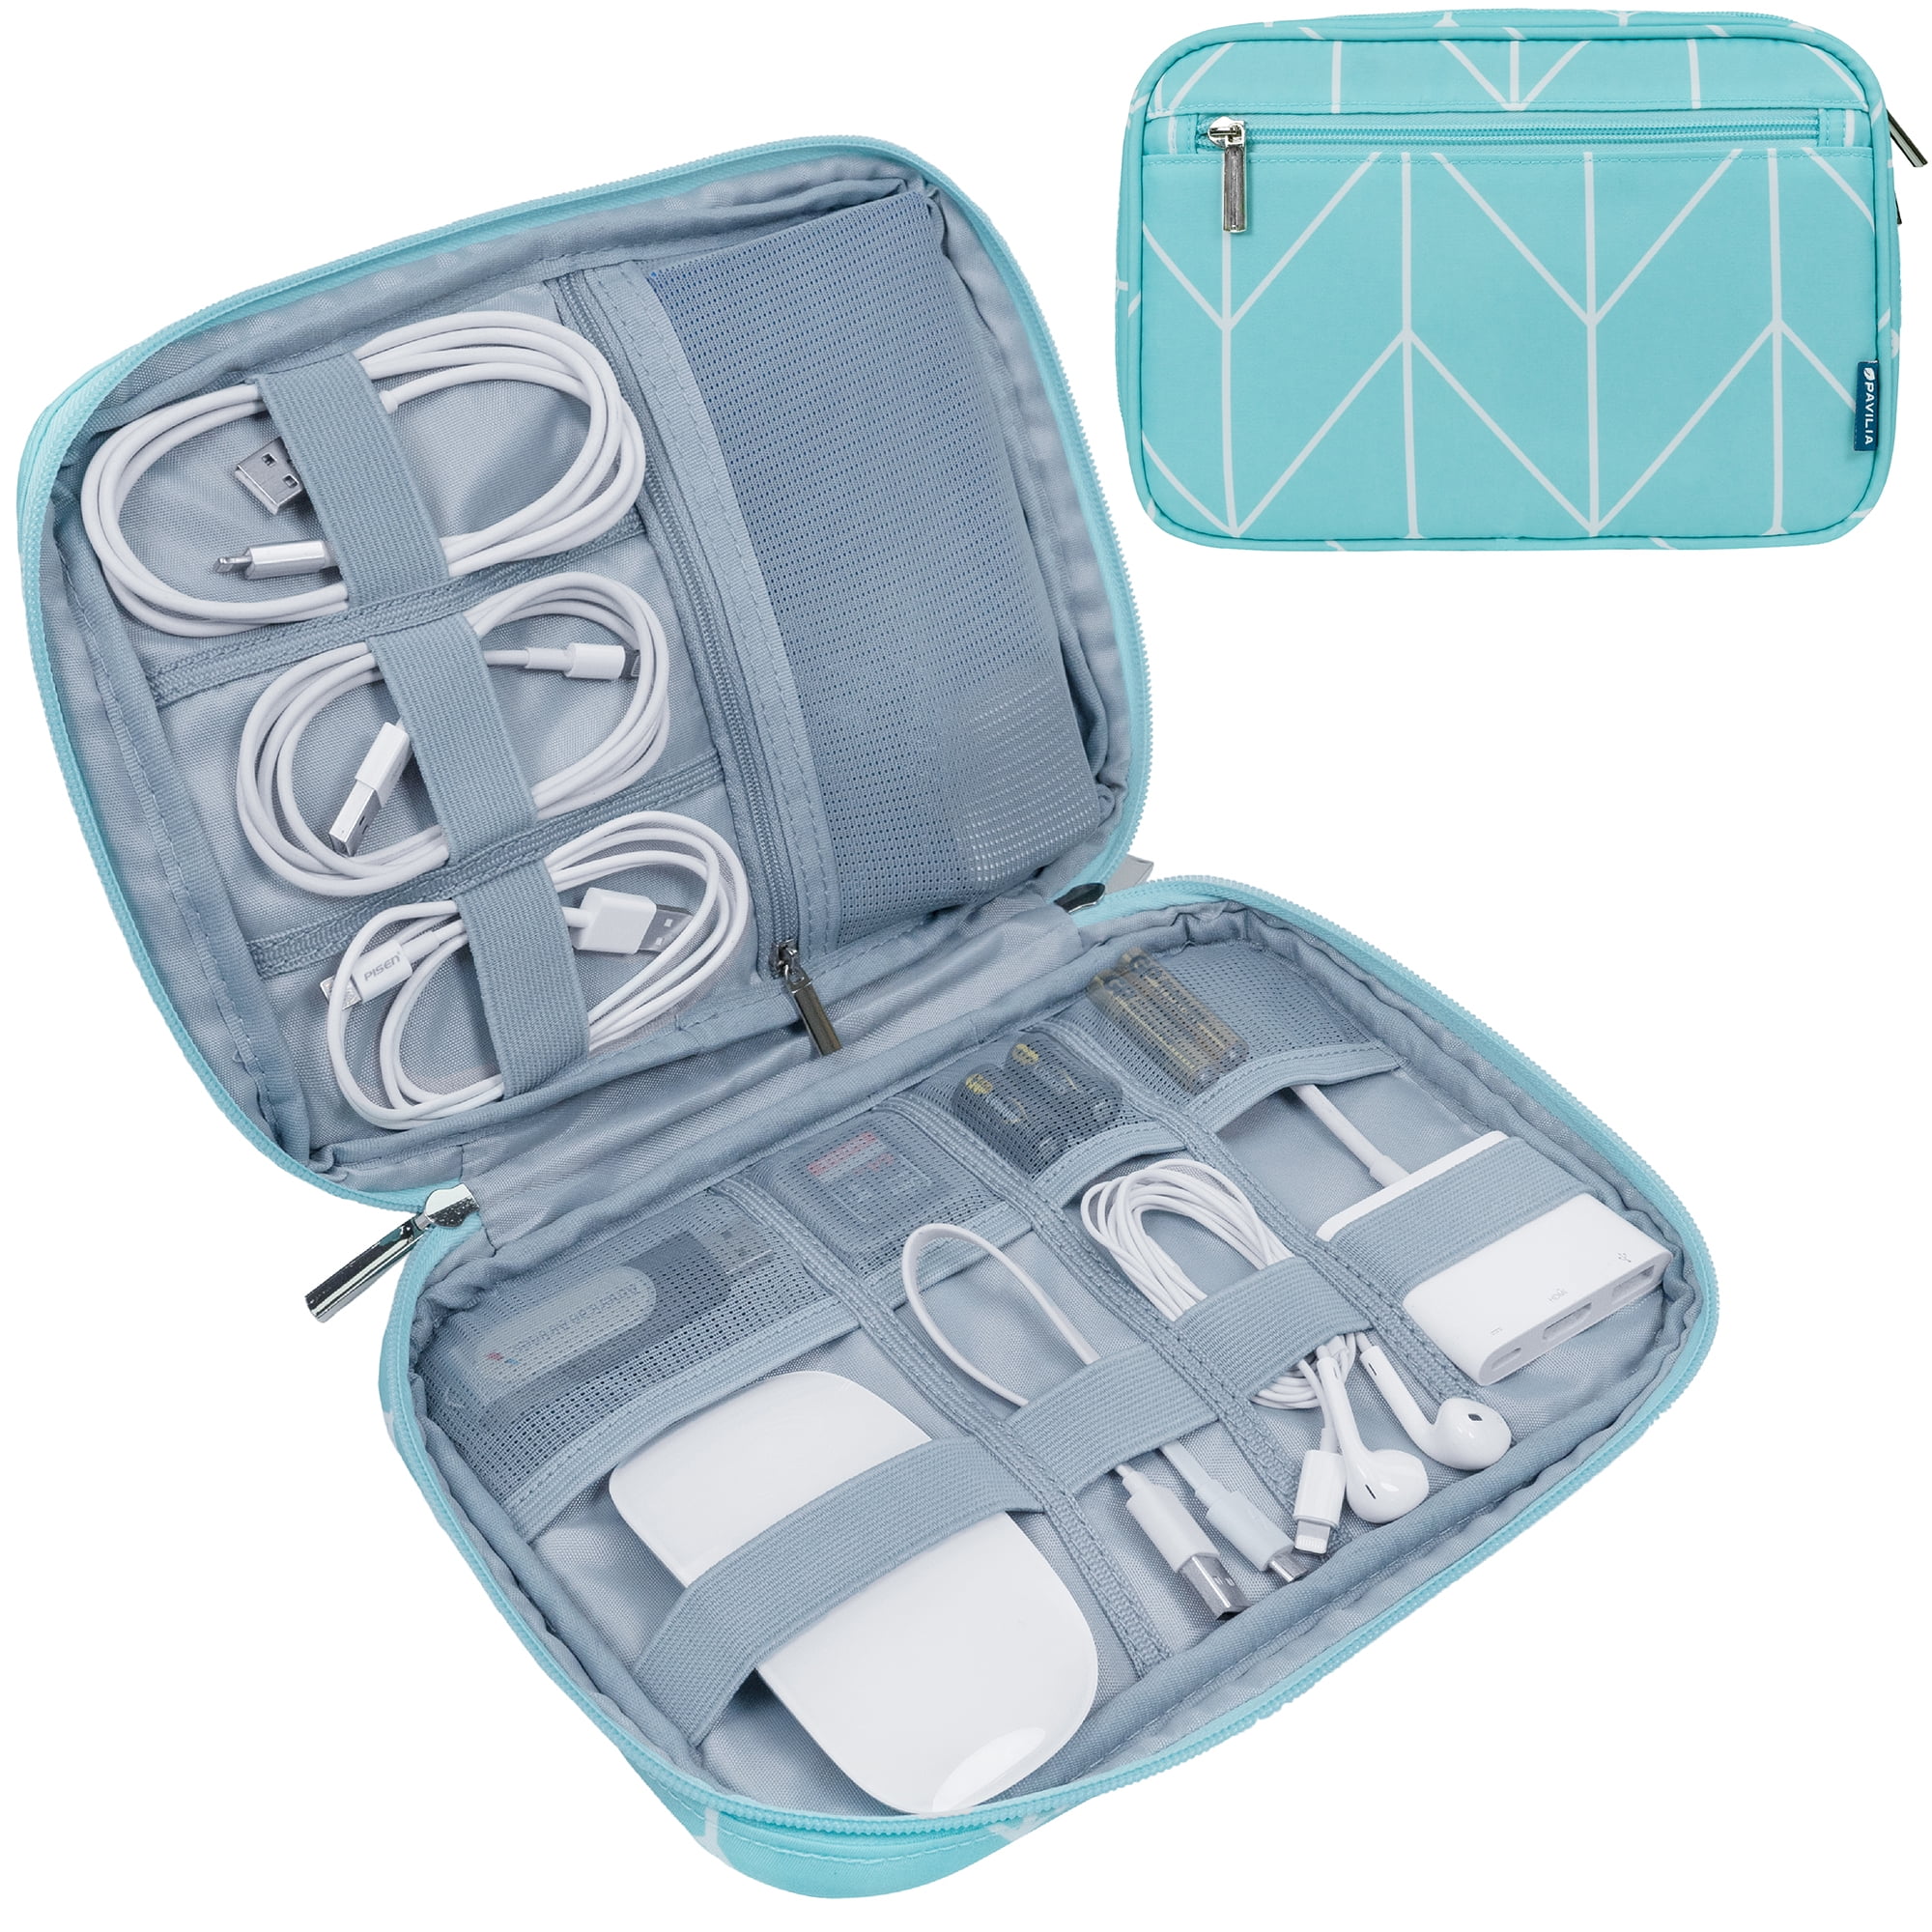 Pavilia Electronic Organizer Small Travel Cable Organizer Bag for Hard, Teal